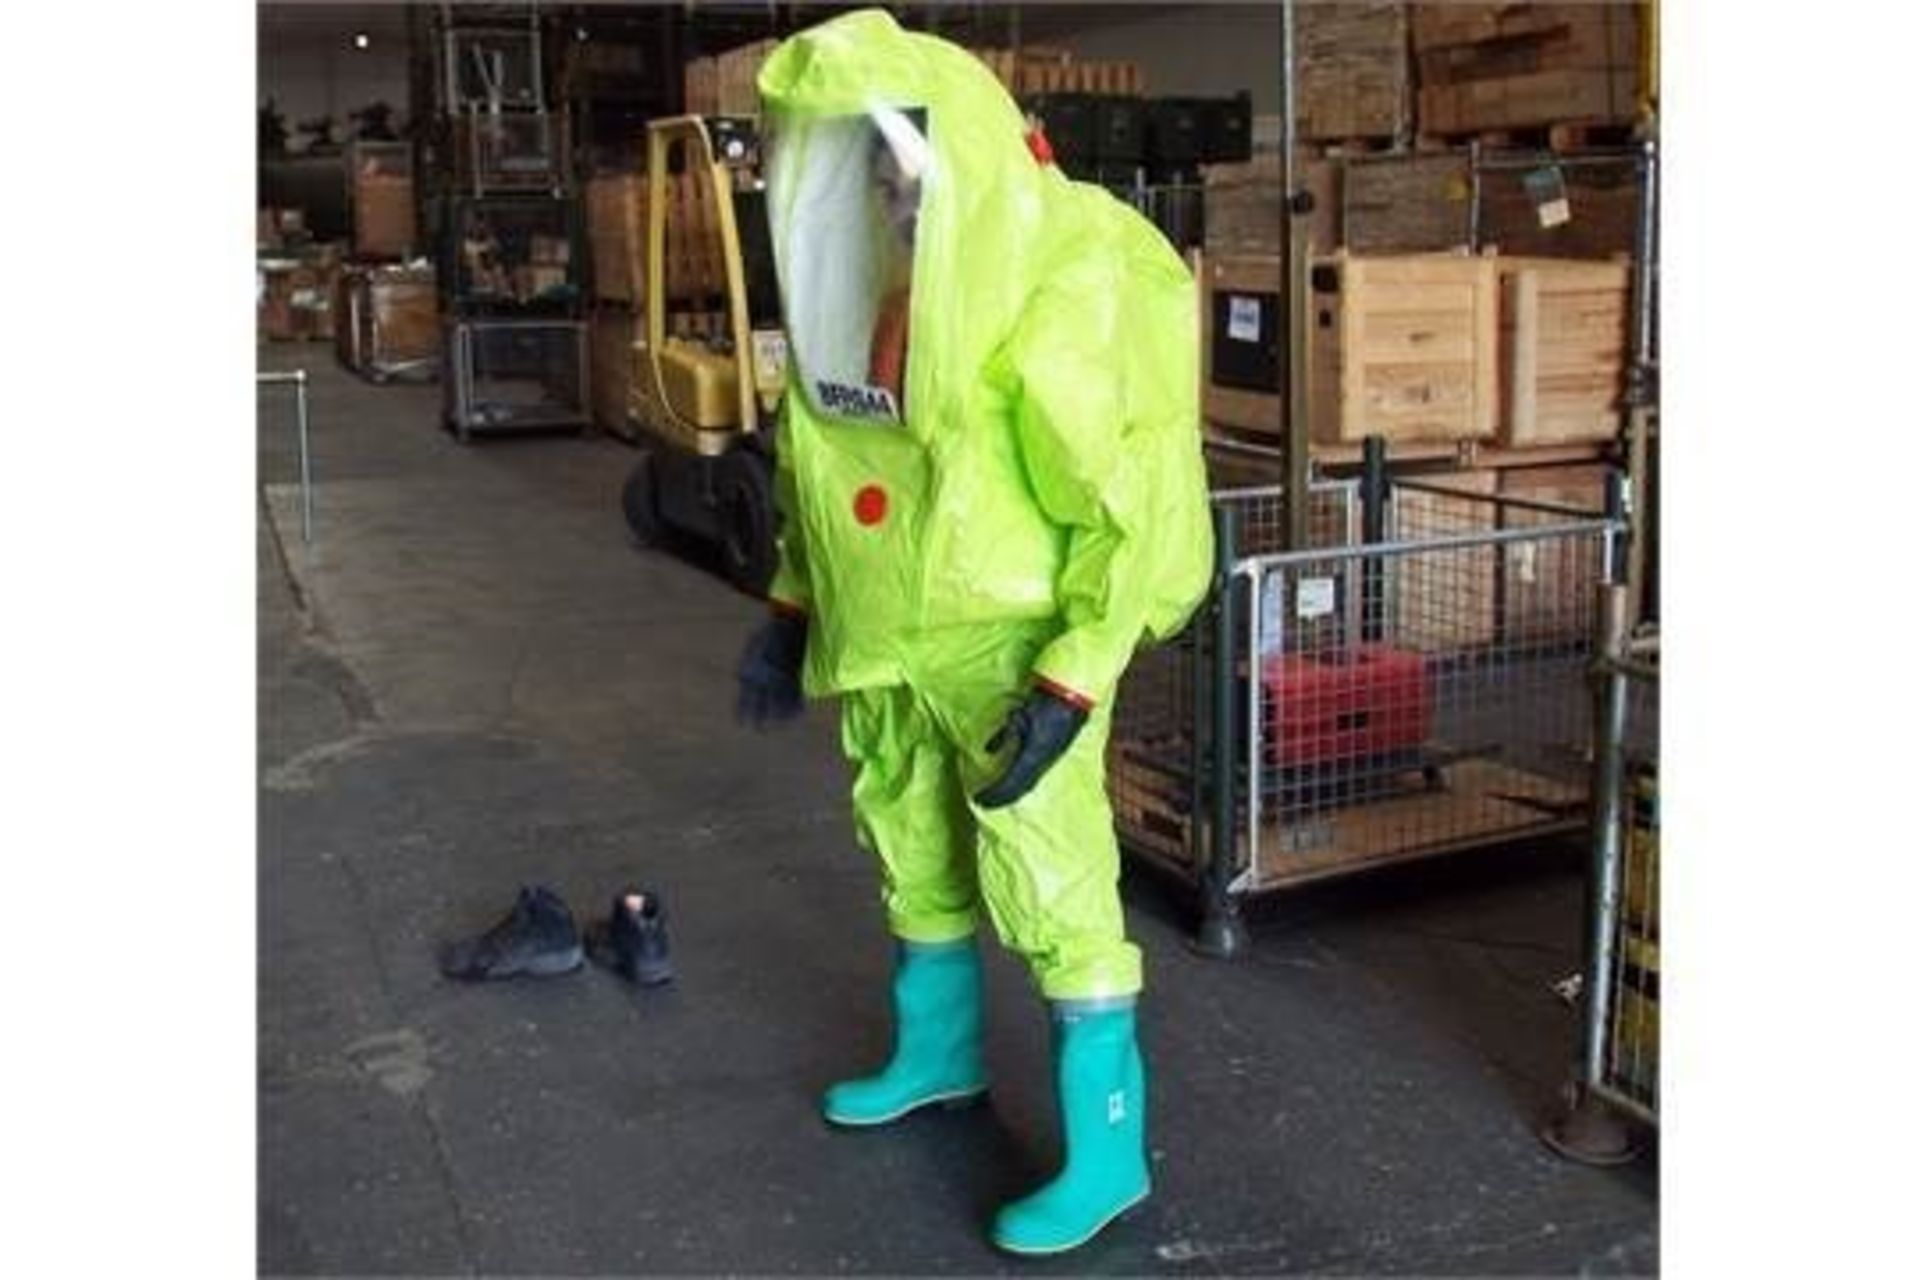 50 x Unissued Respirex Tychem TK Gas-Tight Hazmat Suit Type 1A with Attached Boots and Gloves - Image 5 of 12